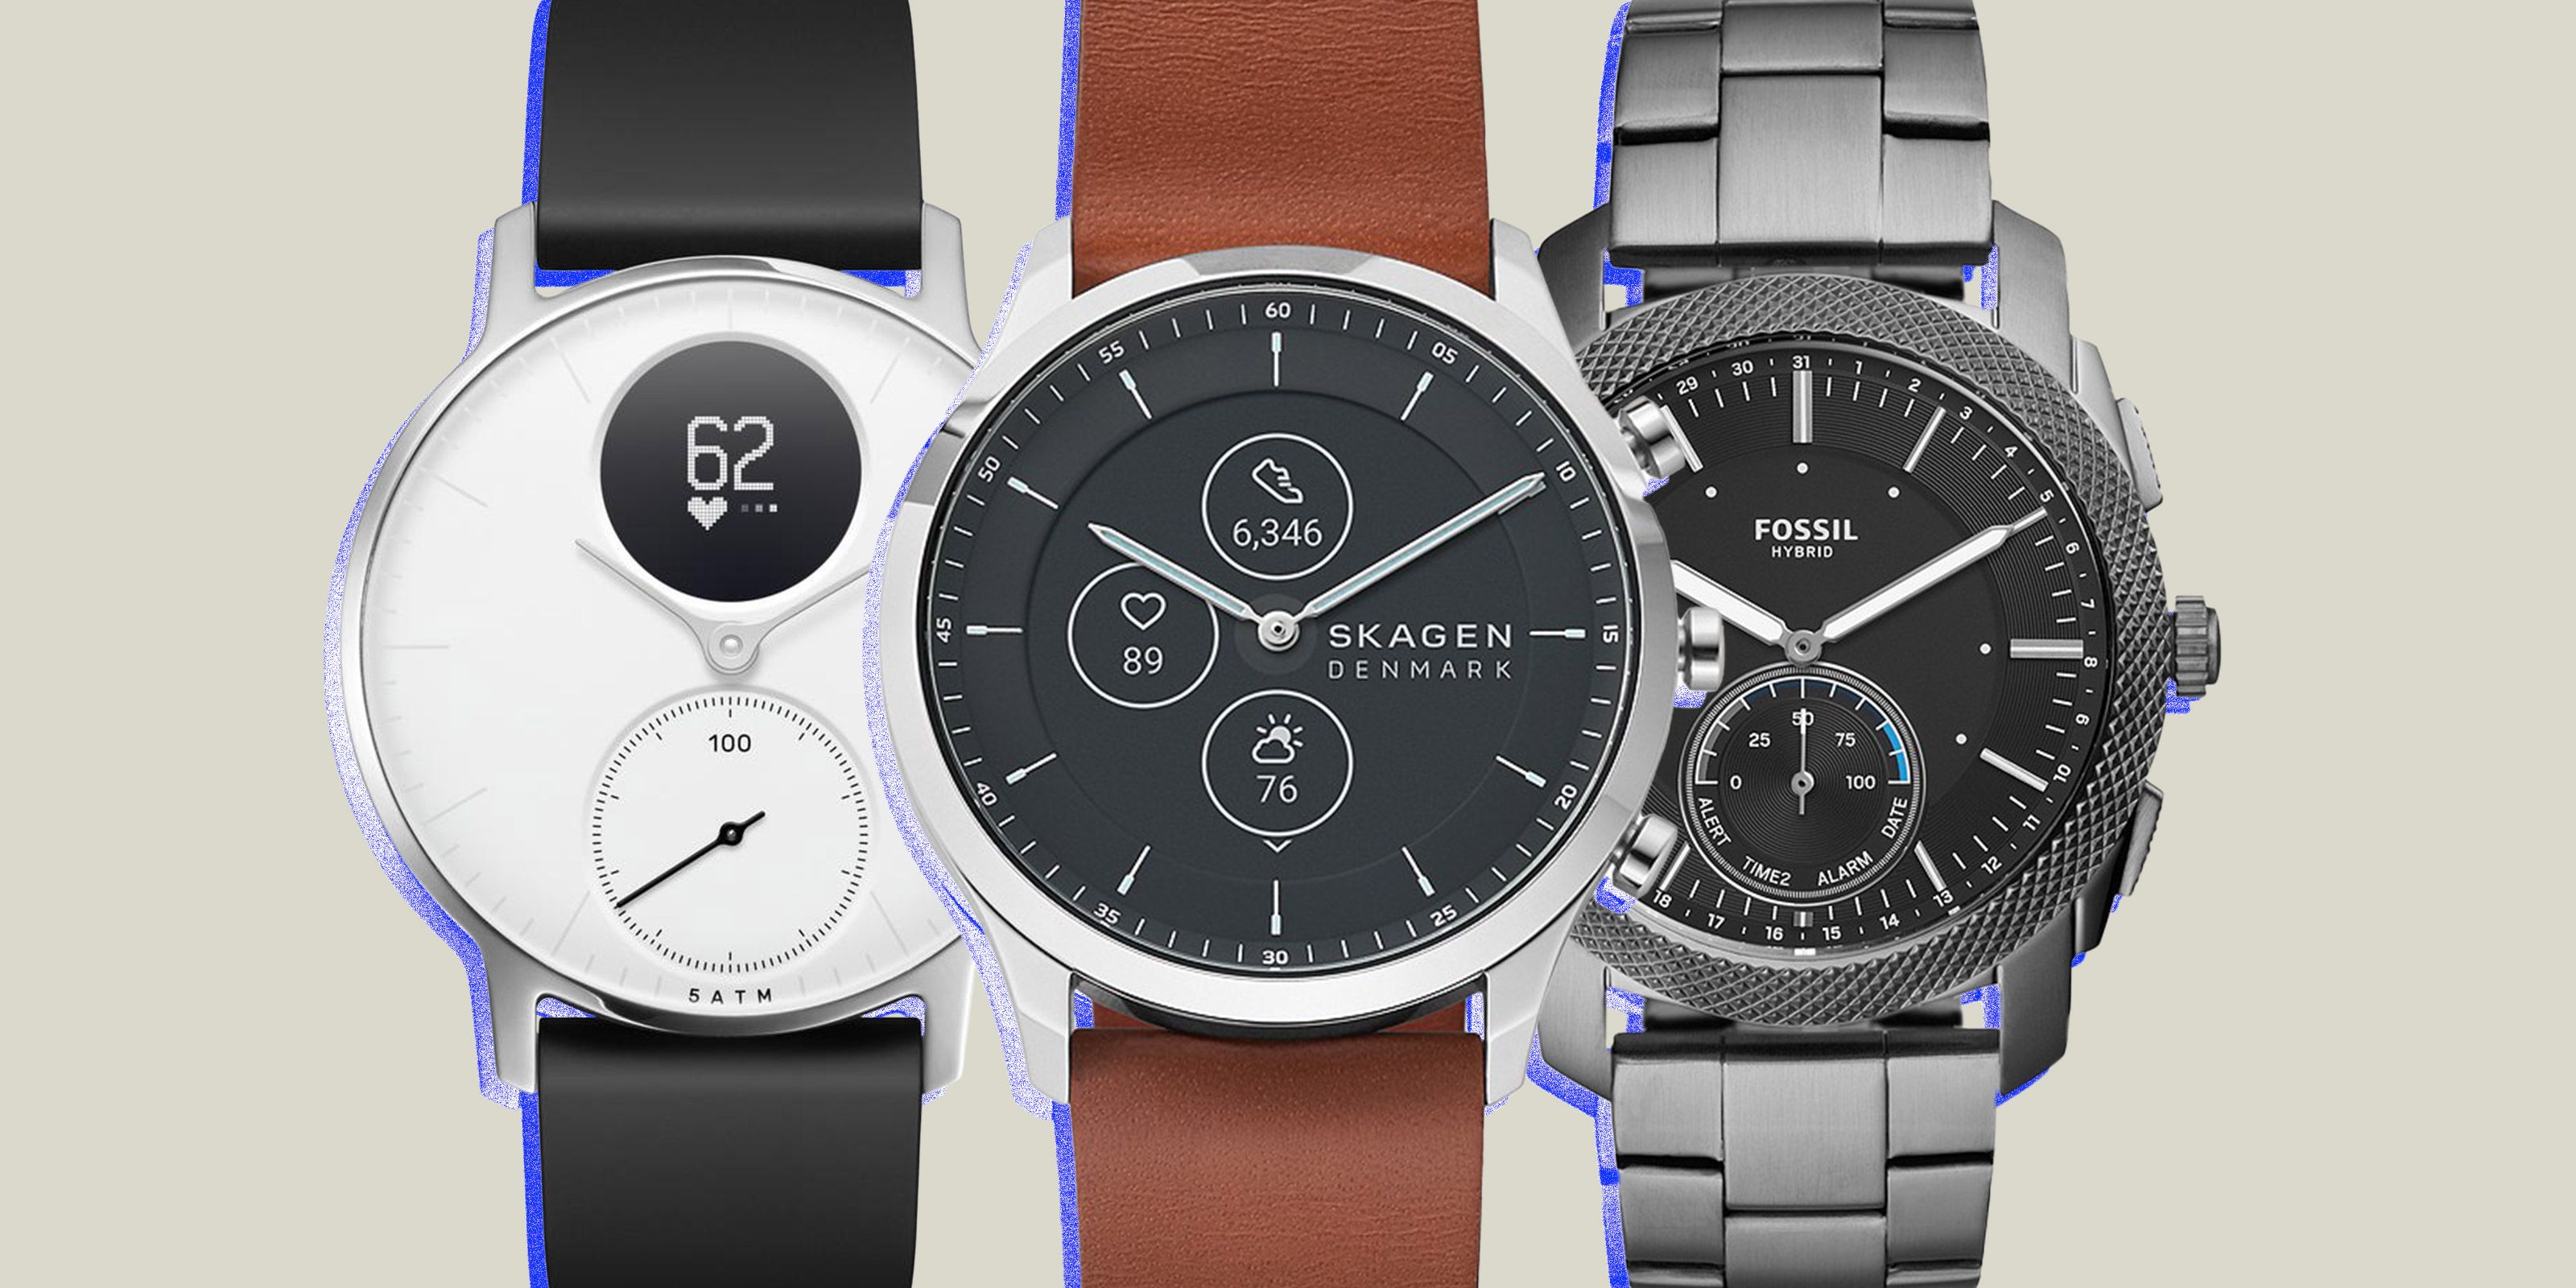 These Smartwatches Traditional Looks With Wearable Tech